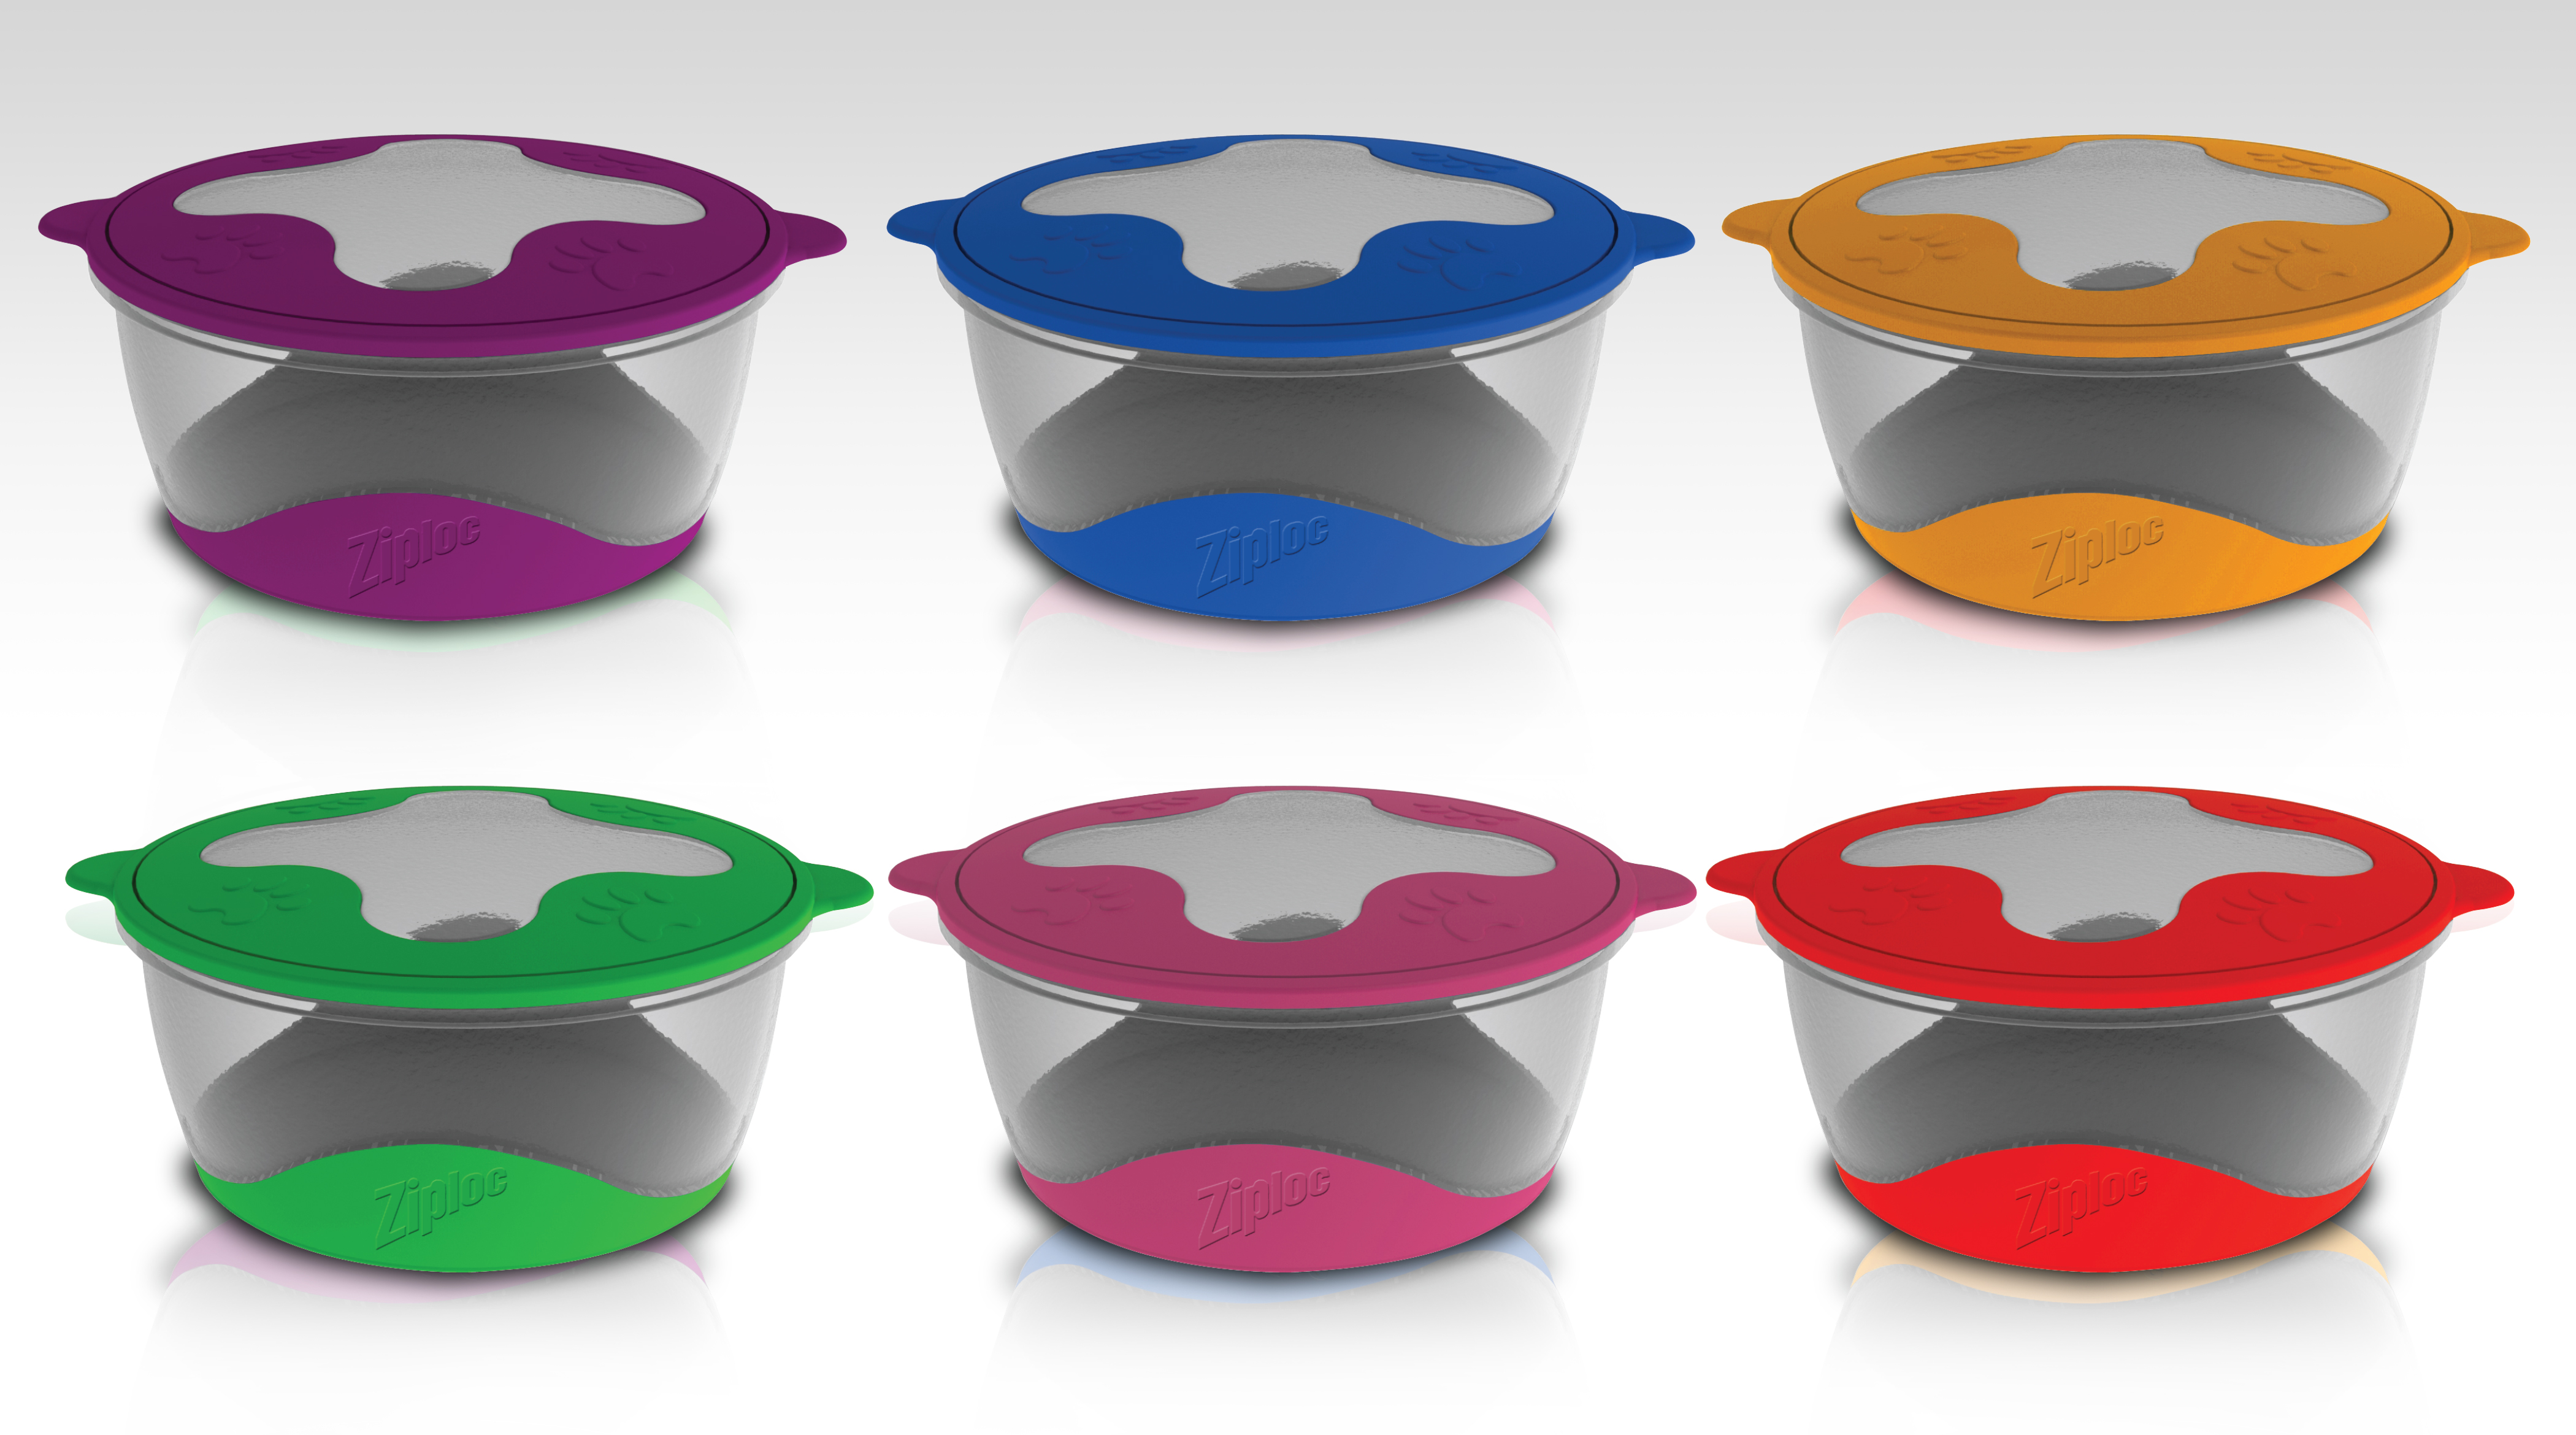 Industrial design of tupperware style products with product design precision